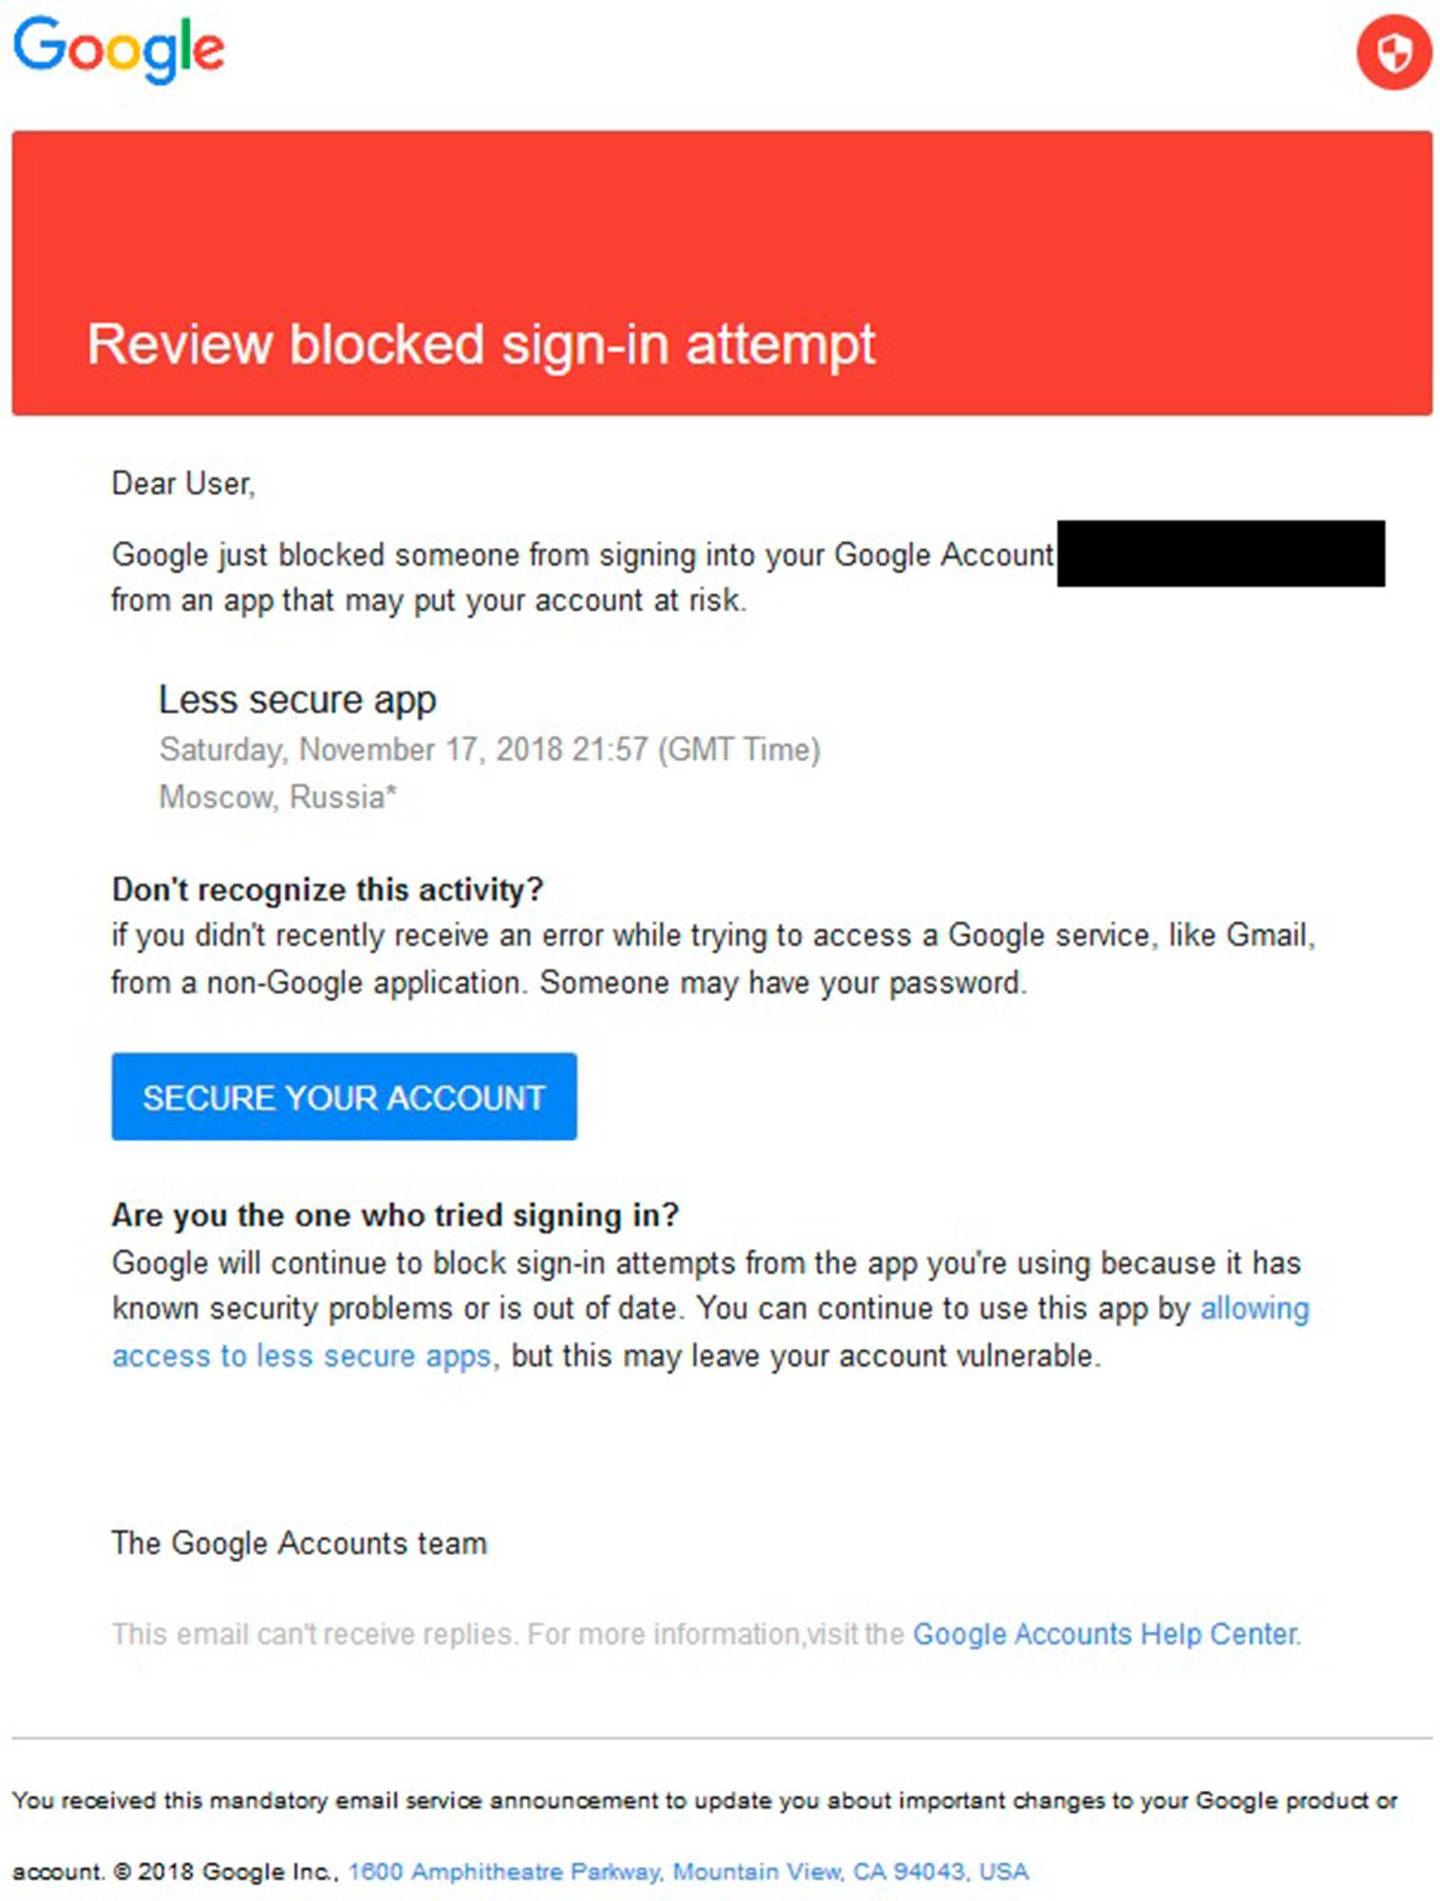 This image shows a Saturday, Nov. 17, 2018 phishing message sent to Jim Sisco of the Virginia-based risk advisory firm Enodo Global, Inc. The email was allegedly sent by the hacking group known as Charming Kitten whose spying campaign closely aligns with Iranâ€™s interests. The email address of the recipient has been redacted to protect his privacy. (AP Photo)